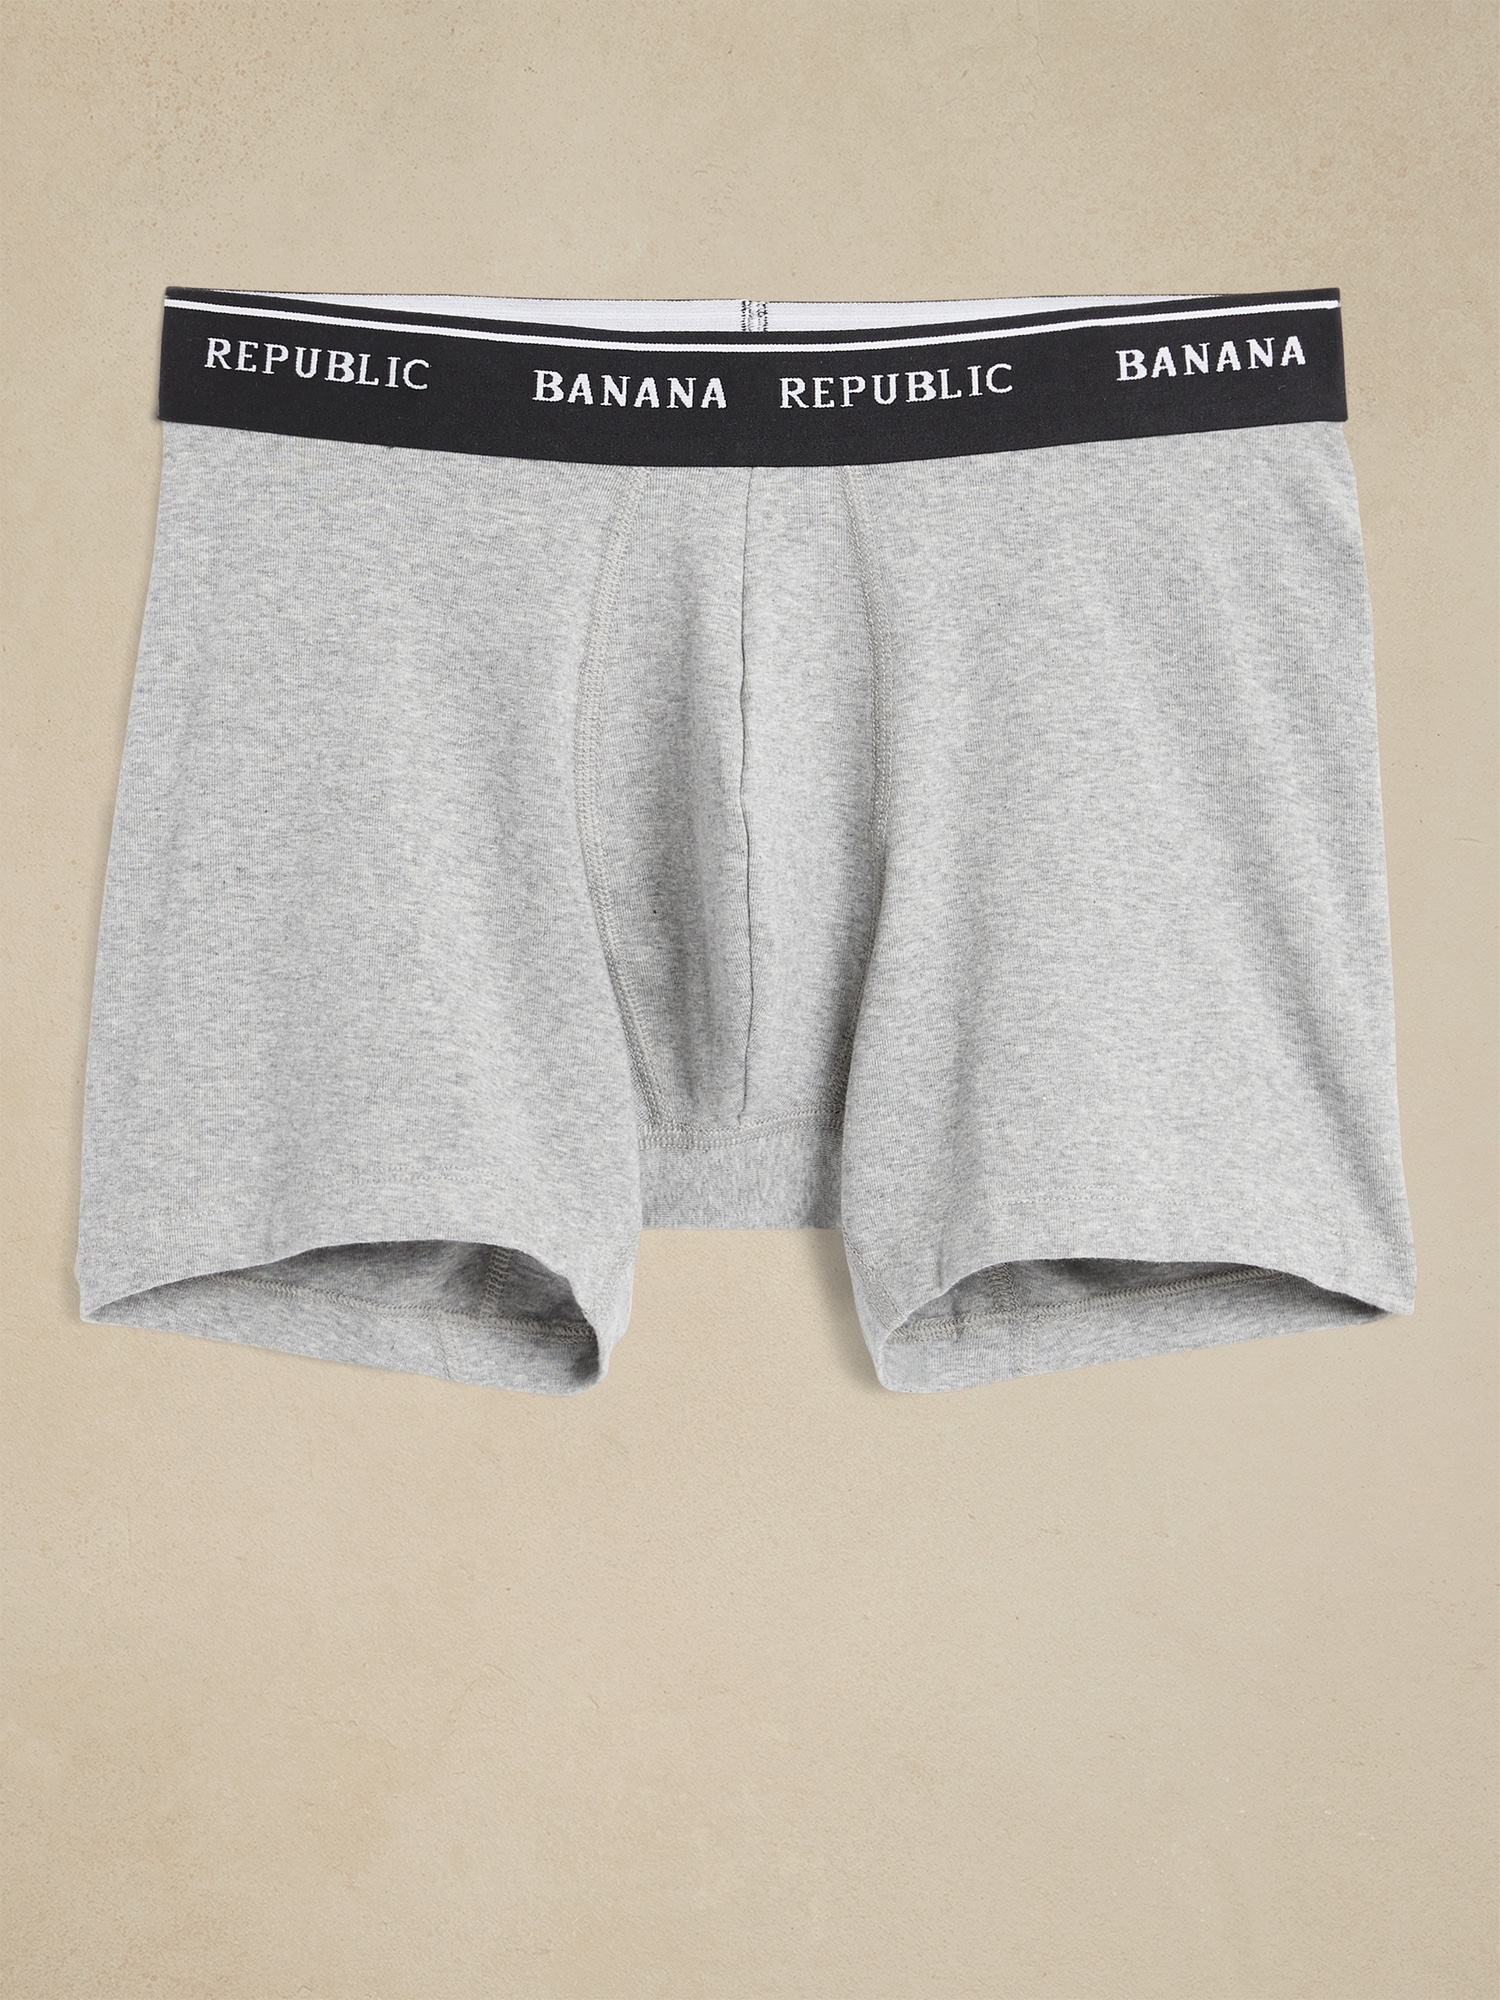 Supreme Boxers, Shop The Largest Collection